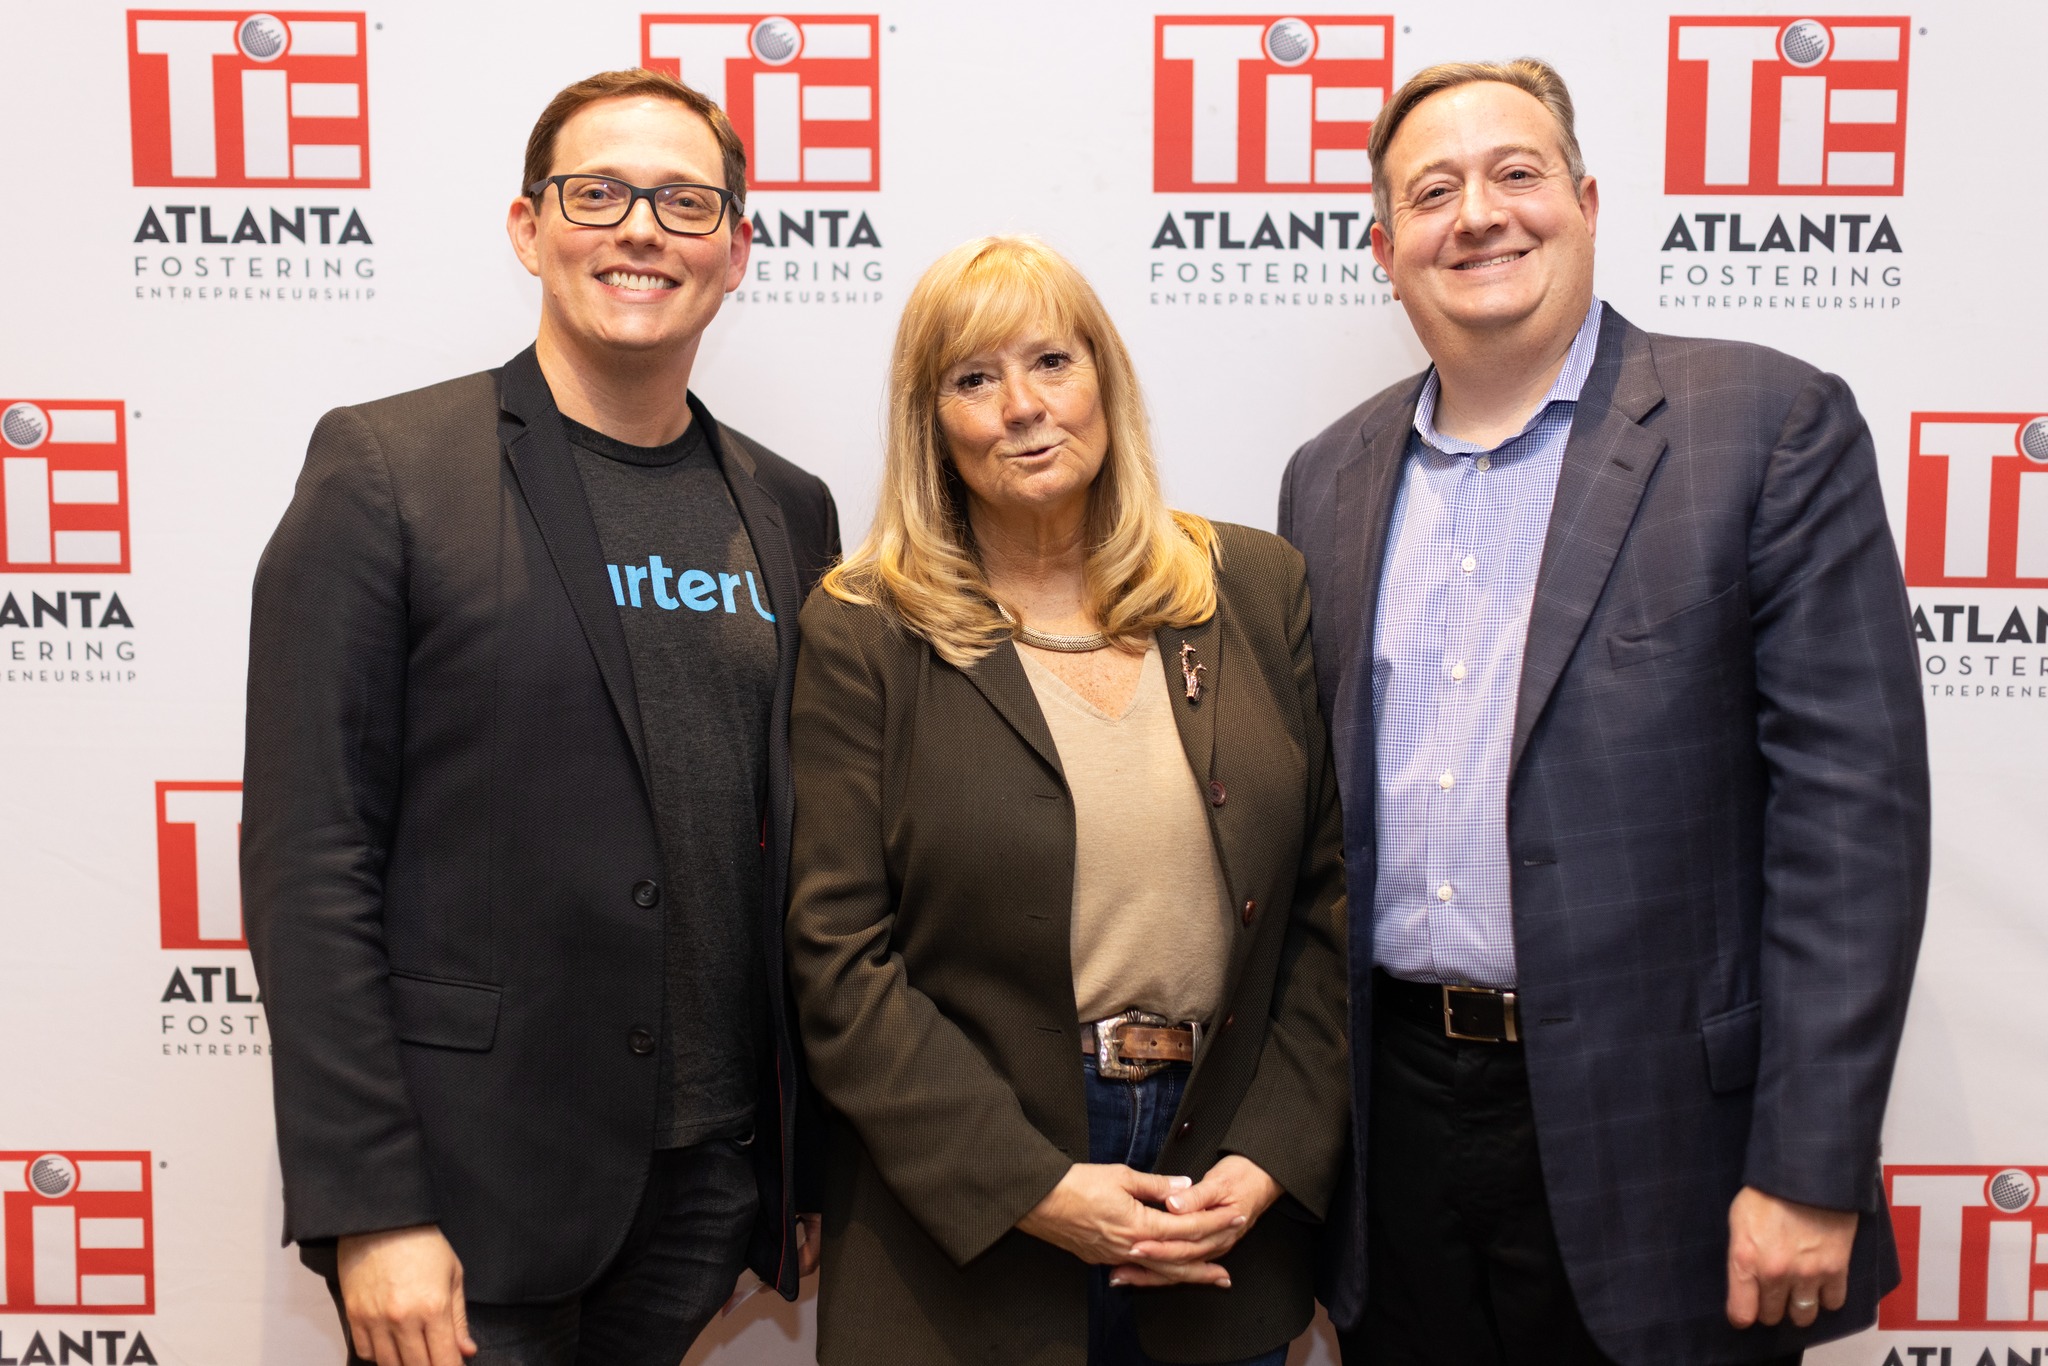 CharterUP President Howard Bornstein, left, participated in a recent TiE Atlanta panel discussion about investment funding.